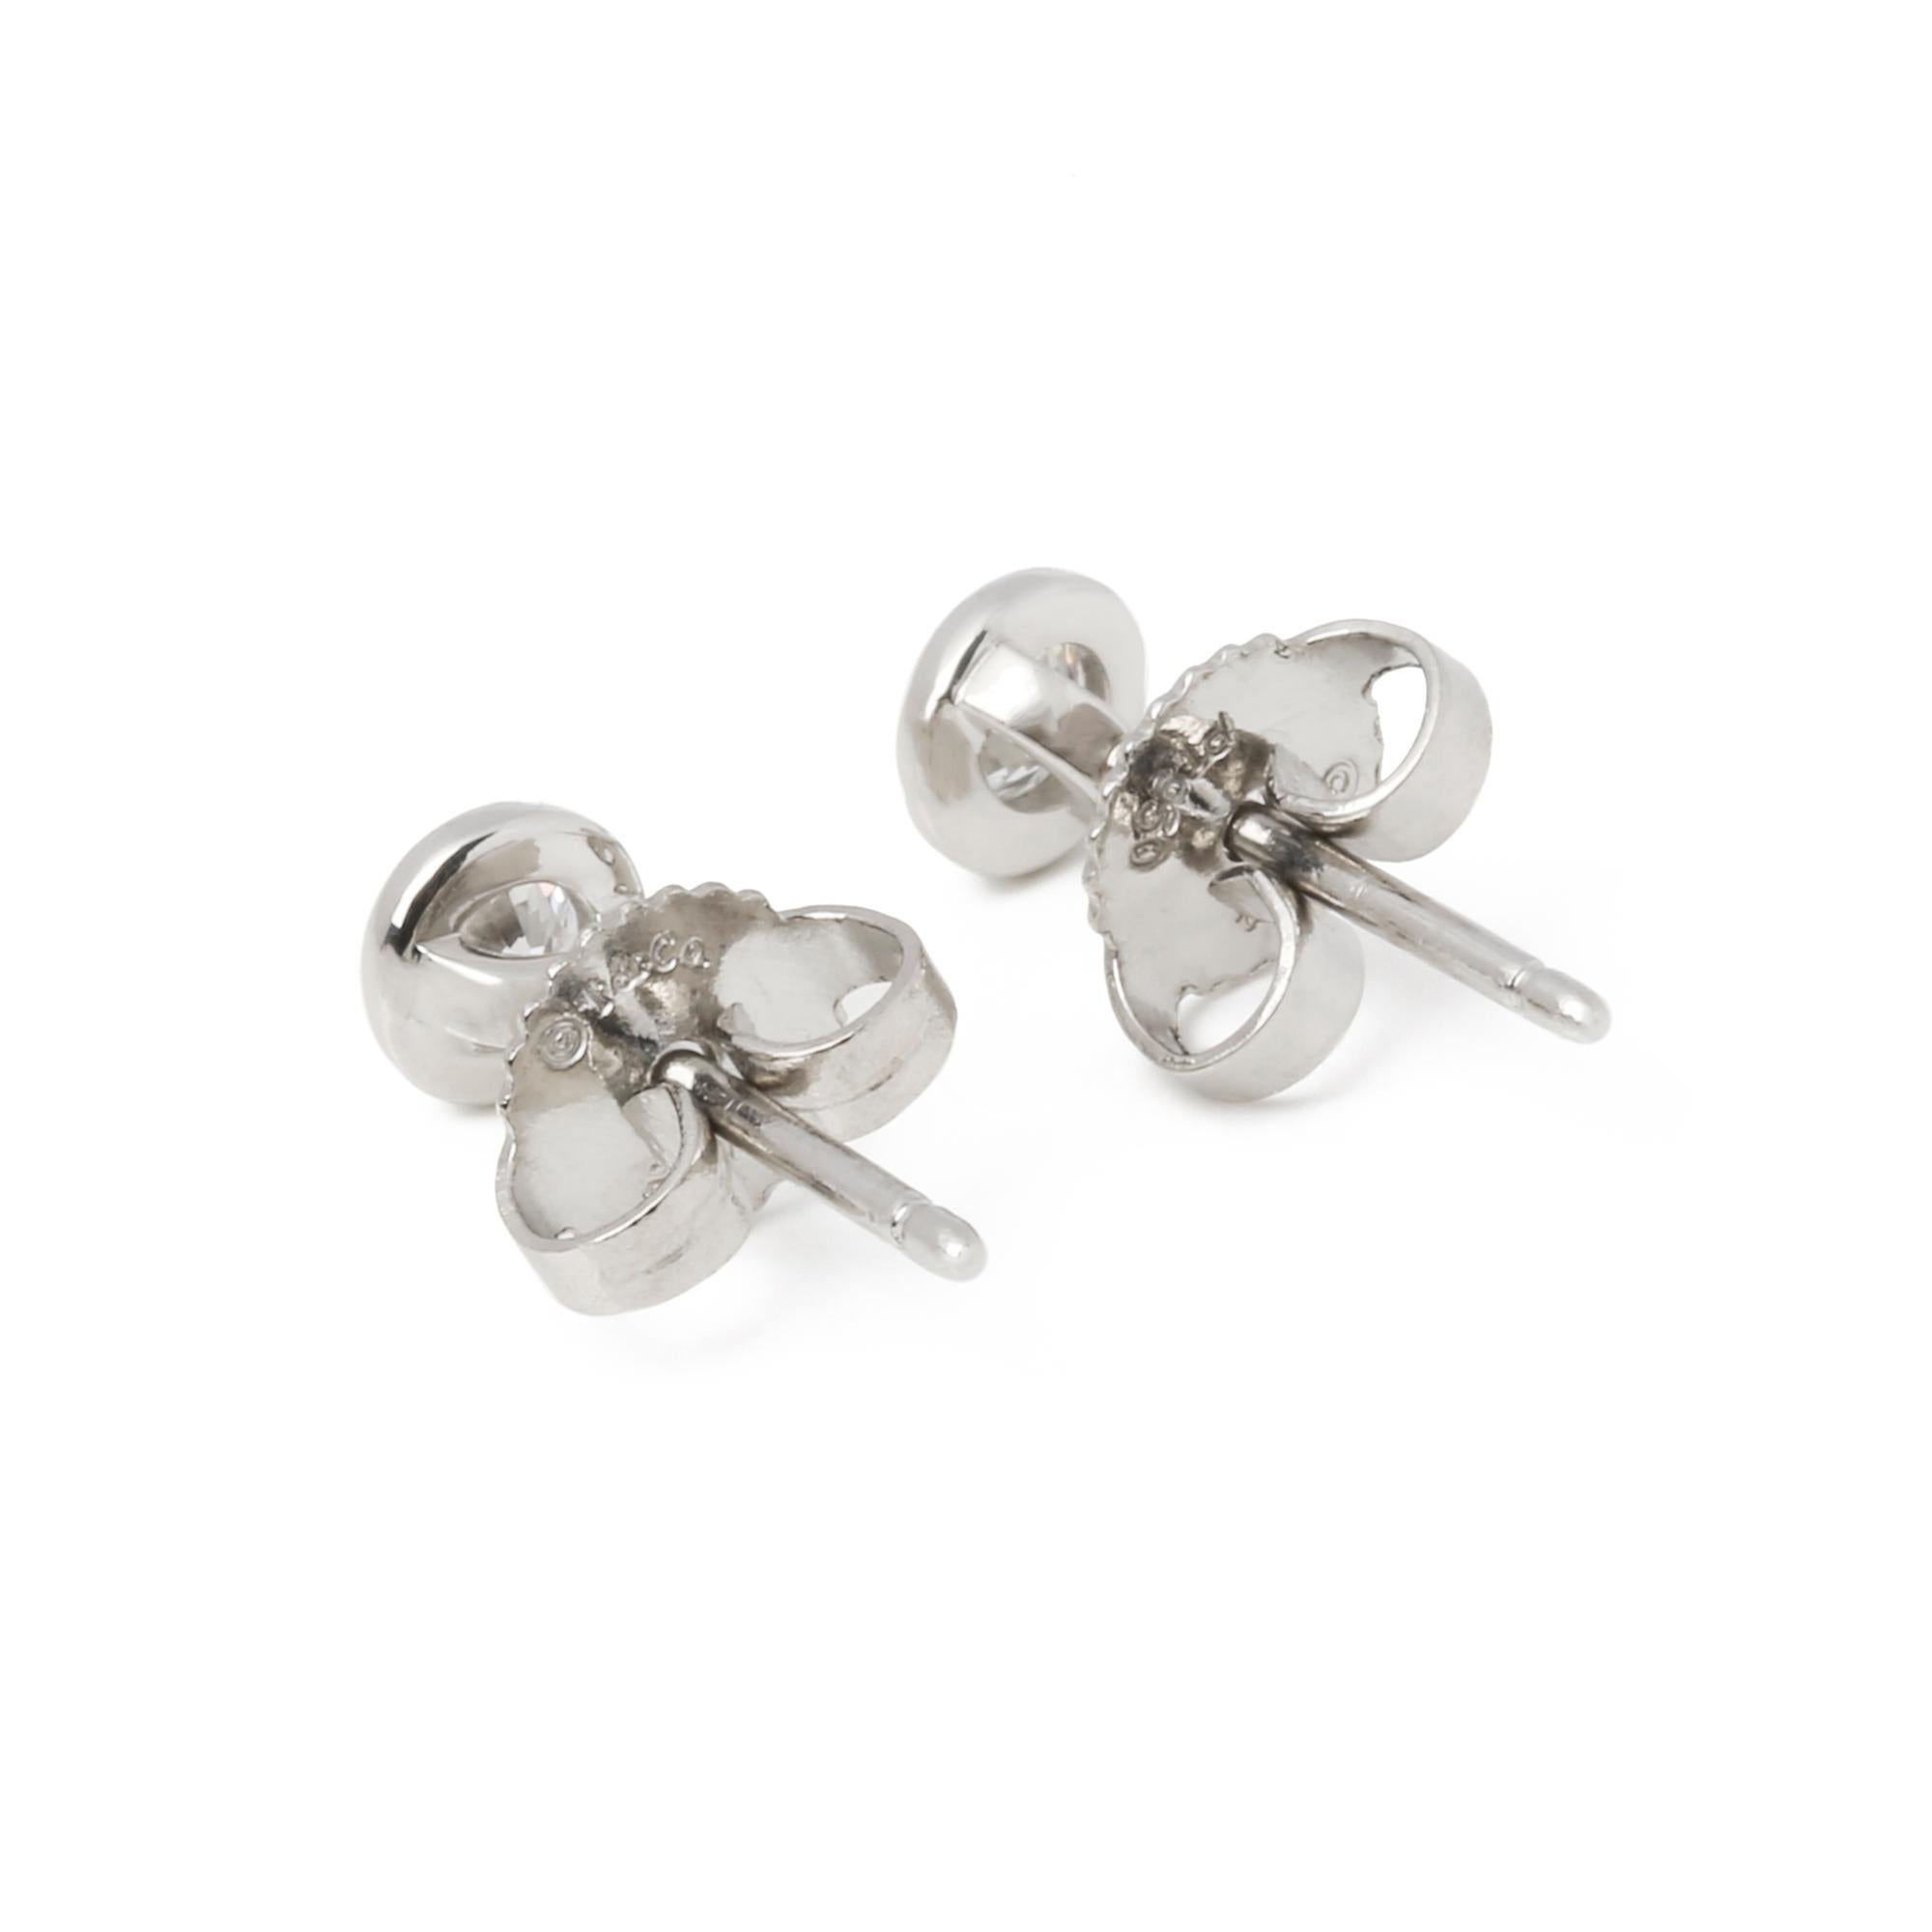 Contemporary Tiffany & Co. Diamonds by the Yard 0.34ct Stud Earrings